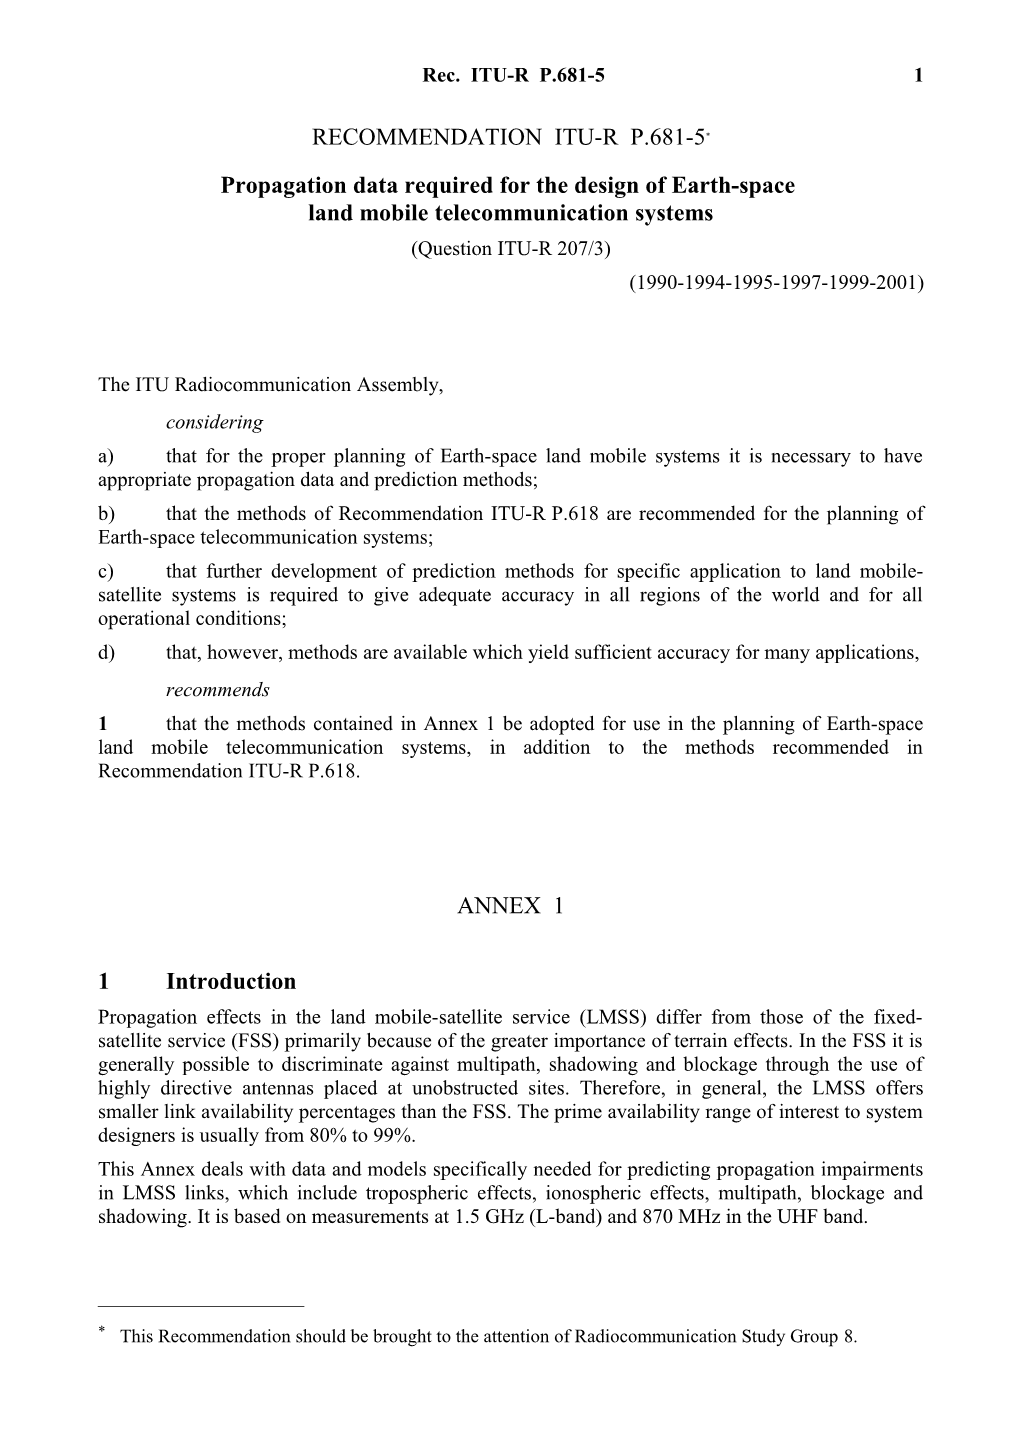 RECOMMENDATION ITU-R P.681-5* - Propagation Data Required for the Design of Earth-Space